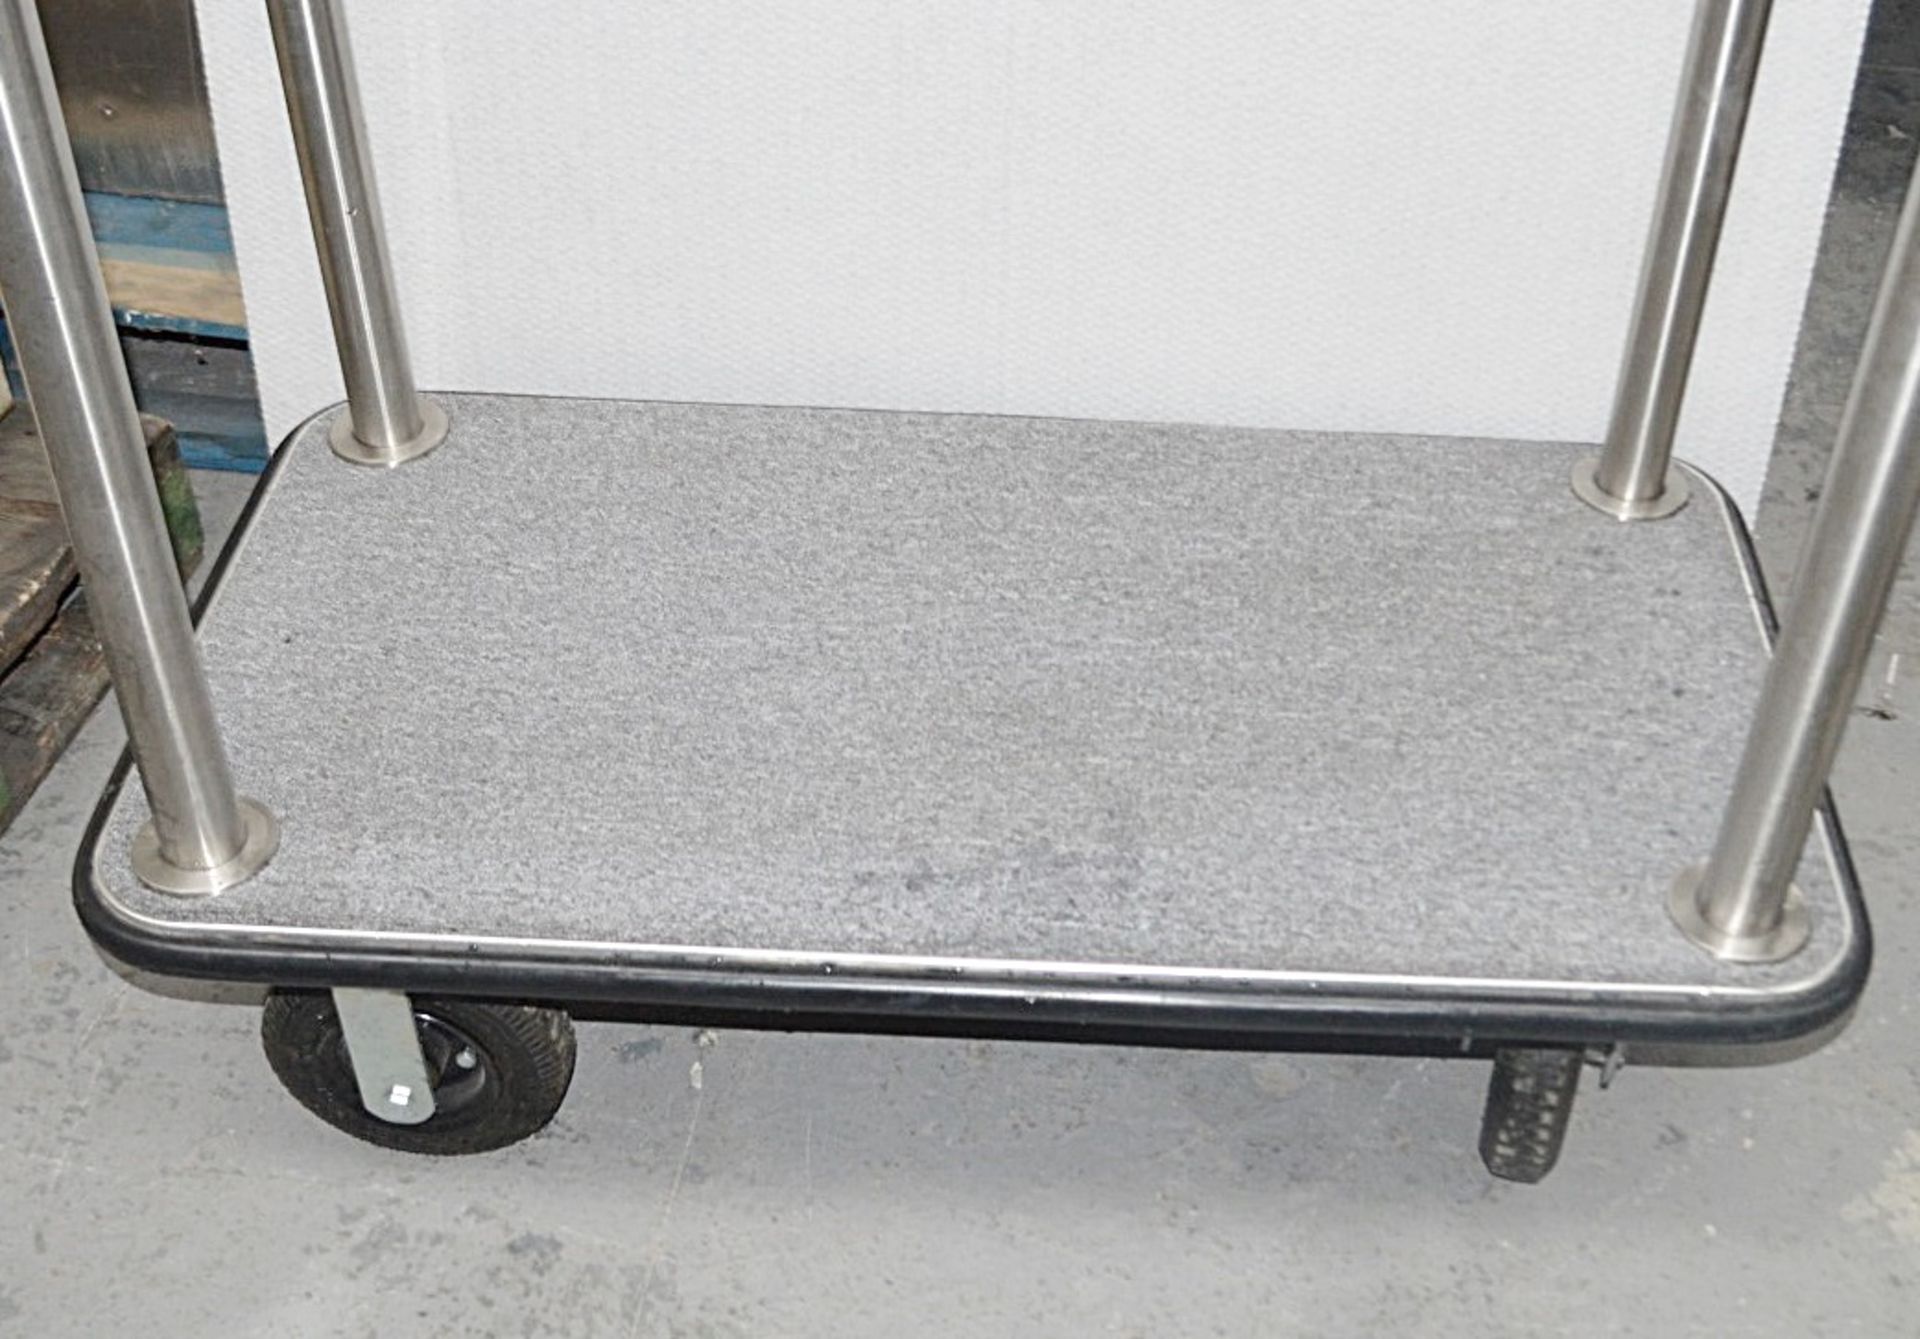 1 x Bolero Commercial Hotel Lobby Luggage Trolley Cart In Brushed Stainless Steel With Carpeted Base - Image 3 of 5